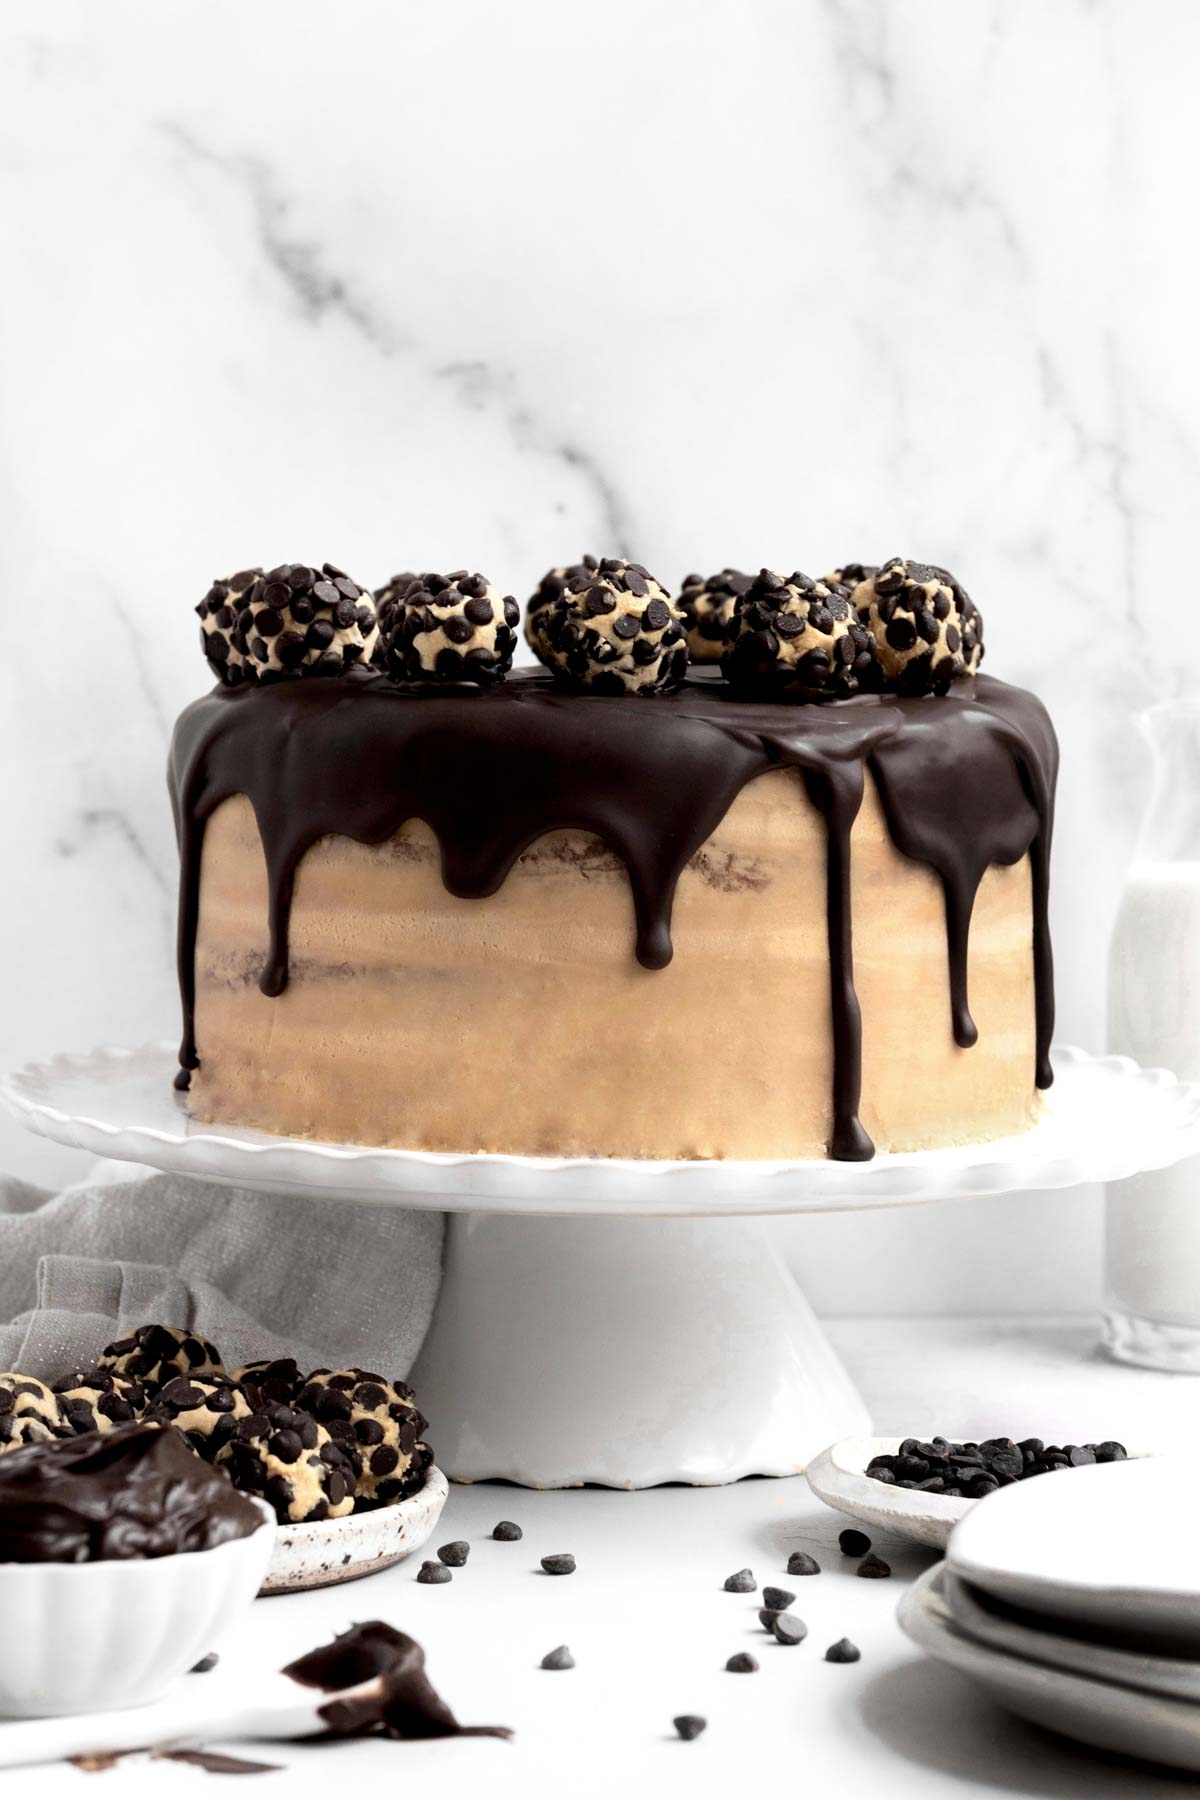 A cake with balls of chocolate chip coated buttercream on chocolate ganache.